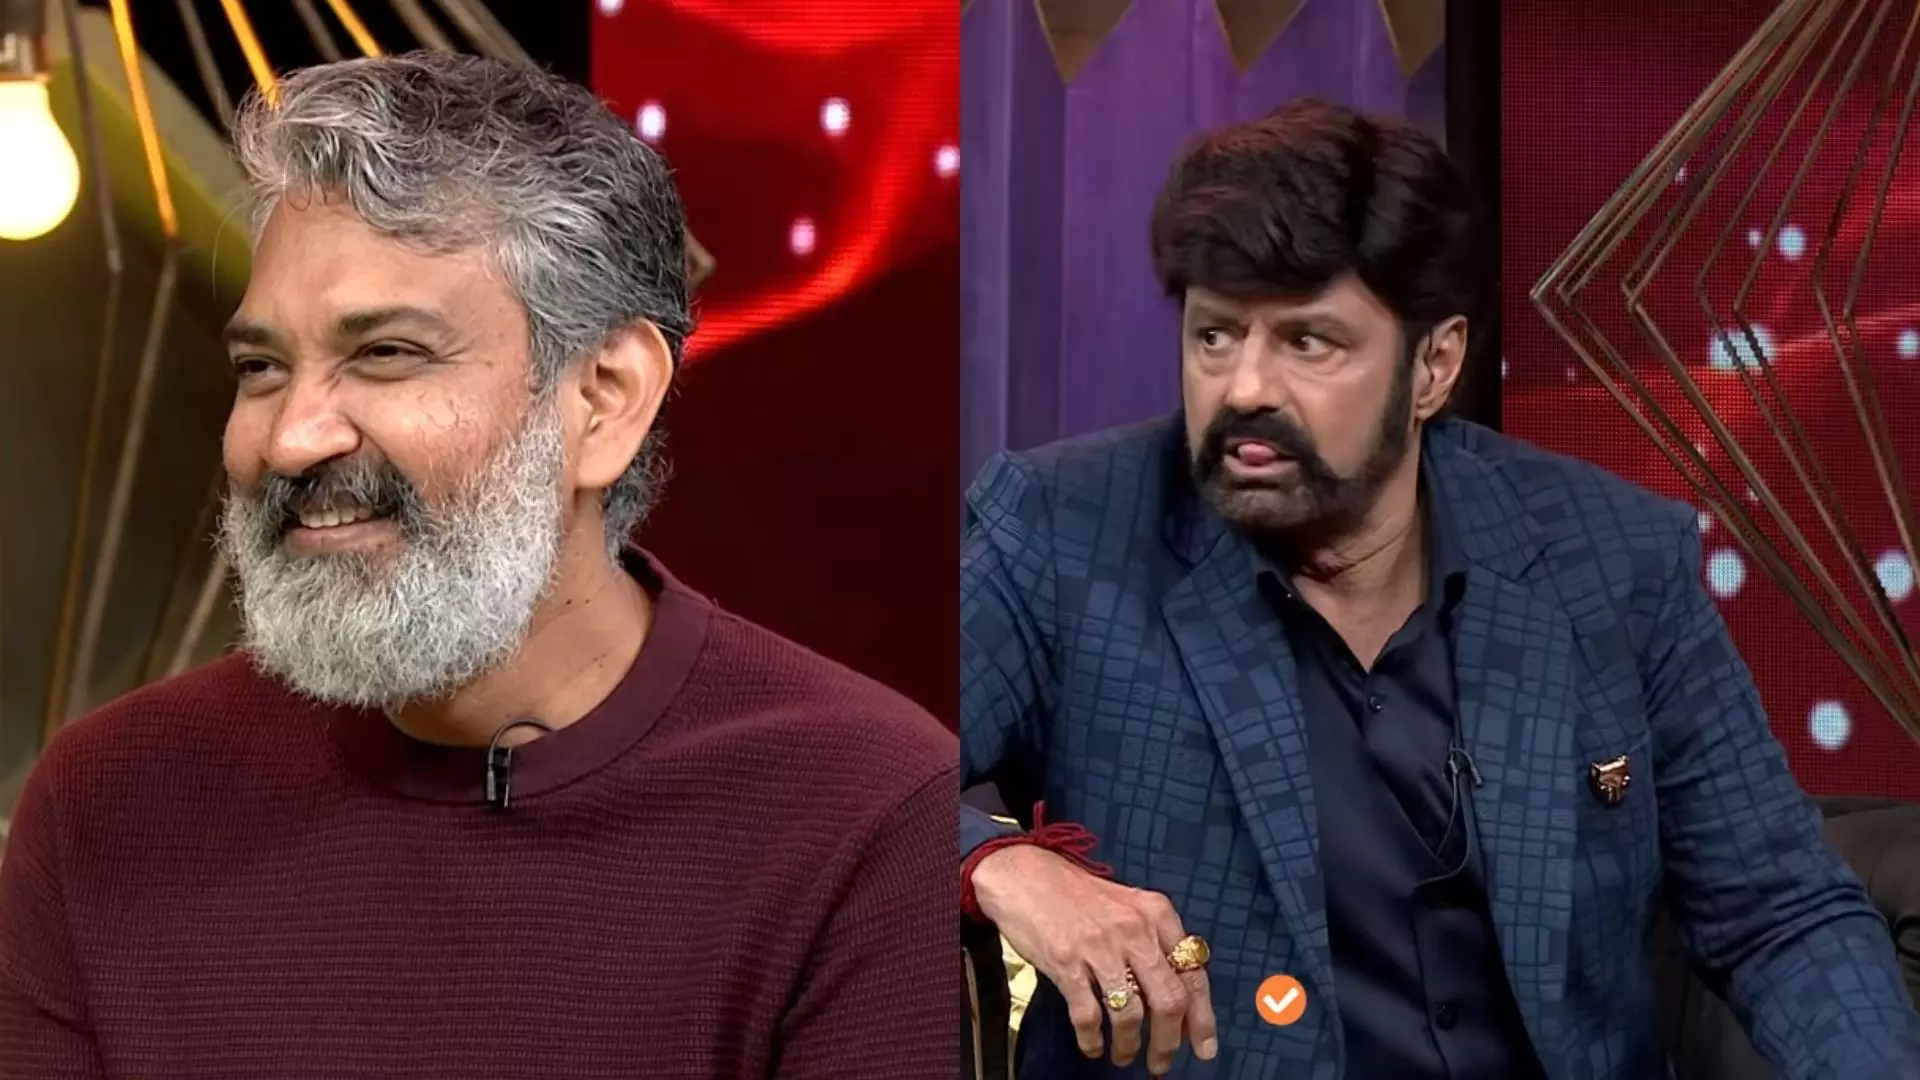 Director Rajamouli Attends as a Guest to Balakrishna Unstoppable Talk Show Promo Released Today 15 12 2021